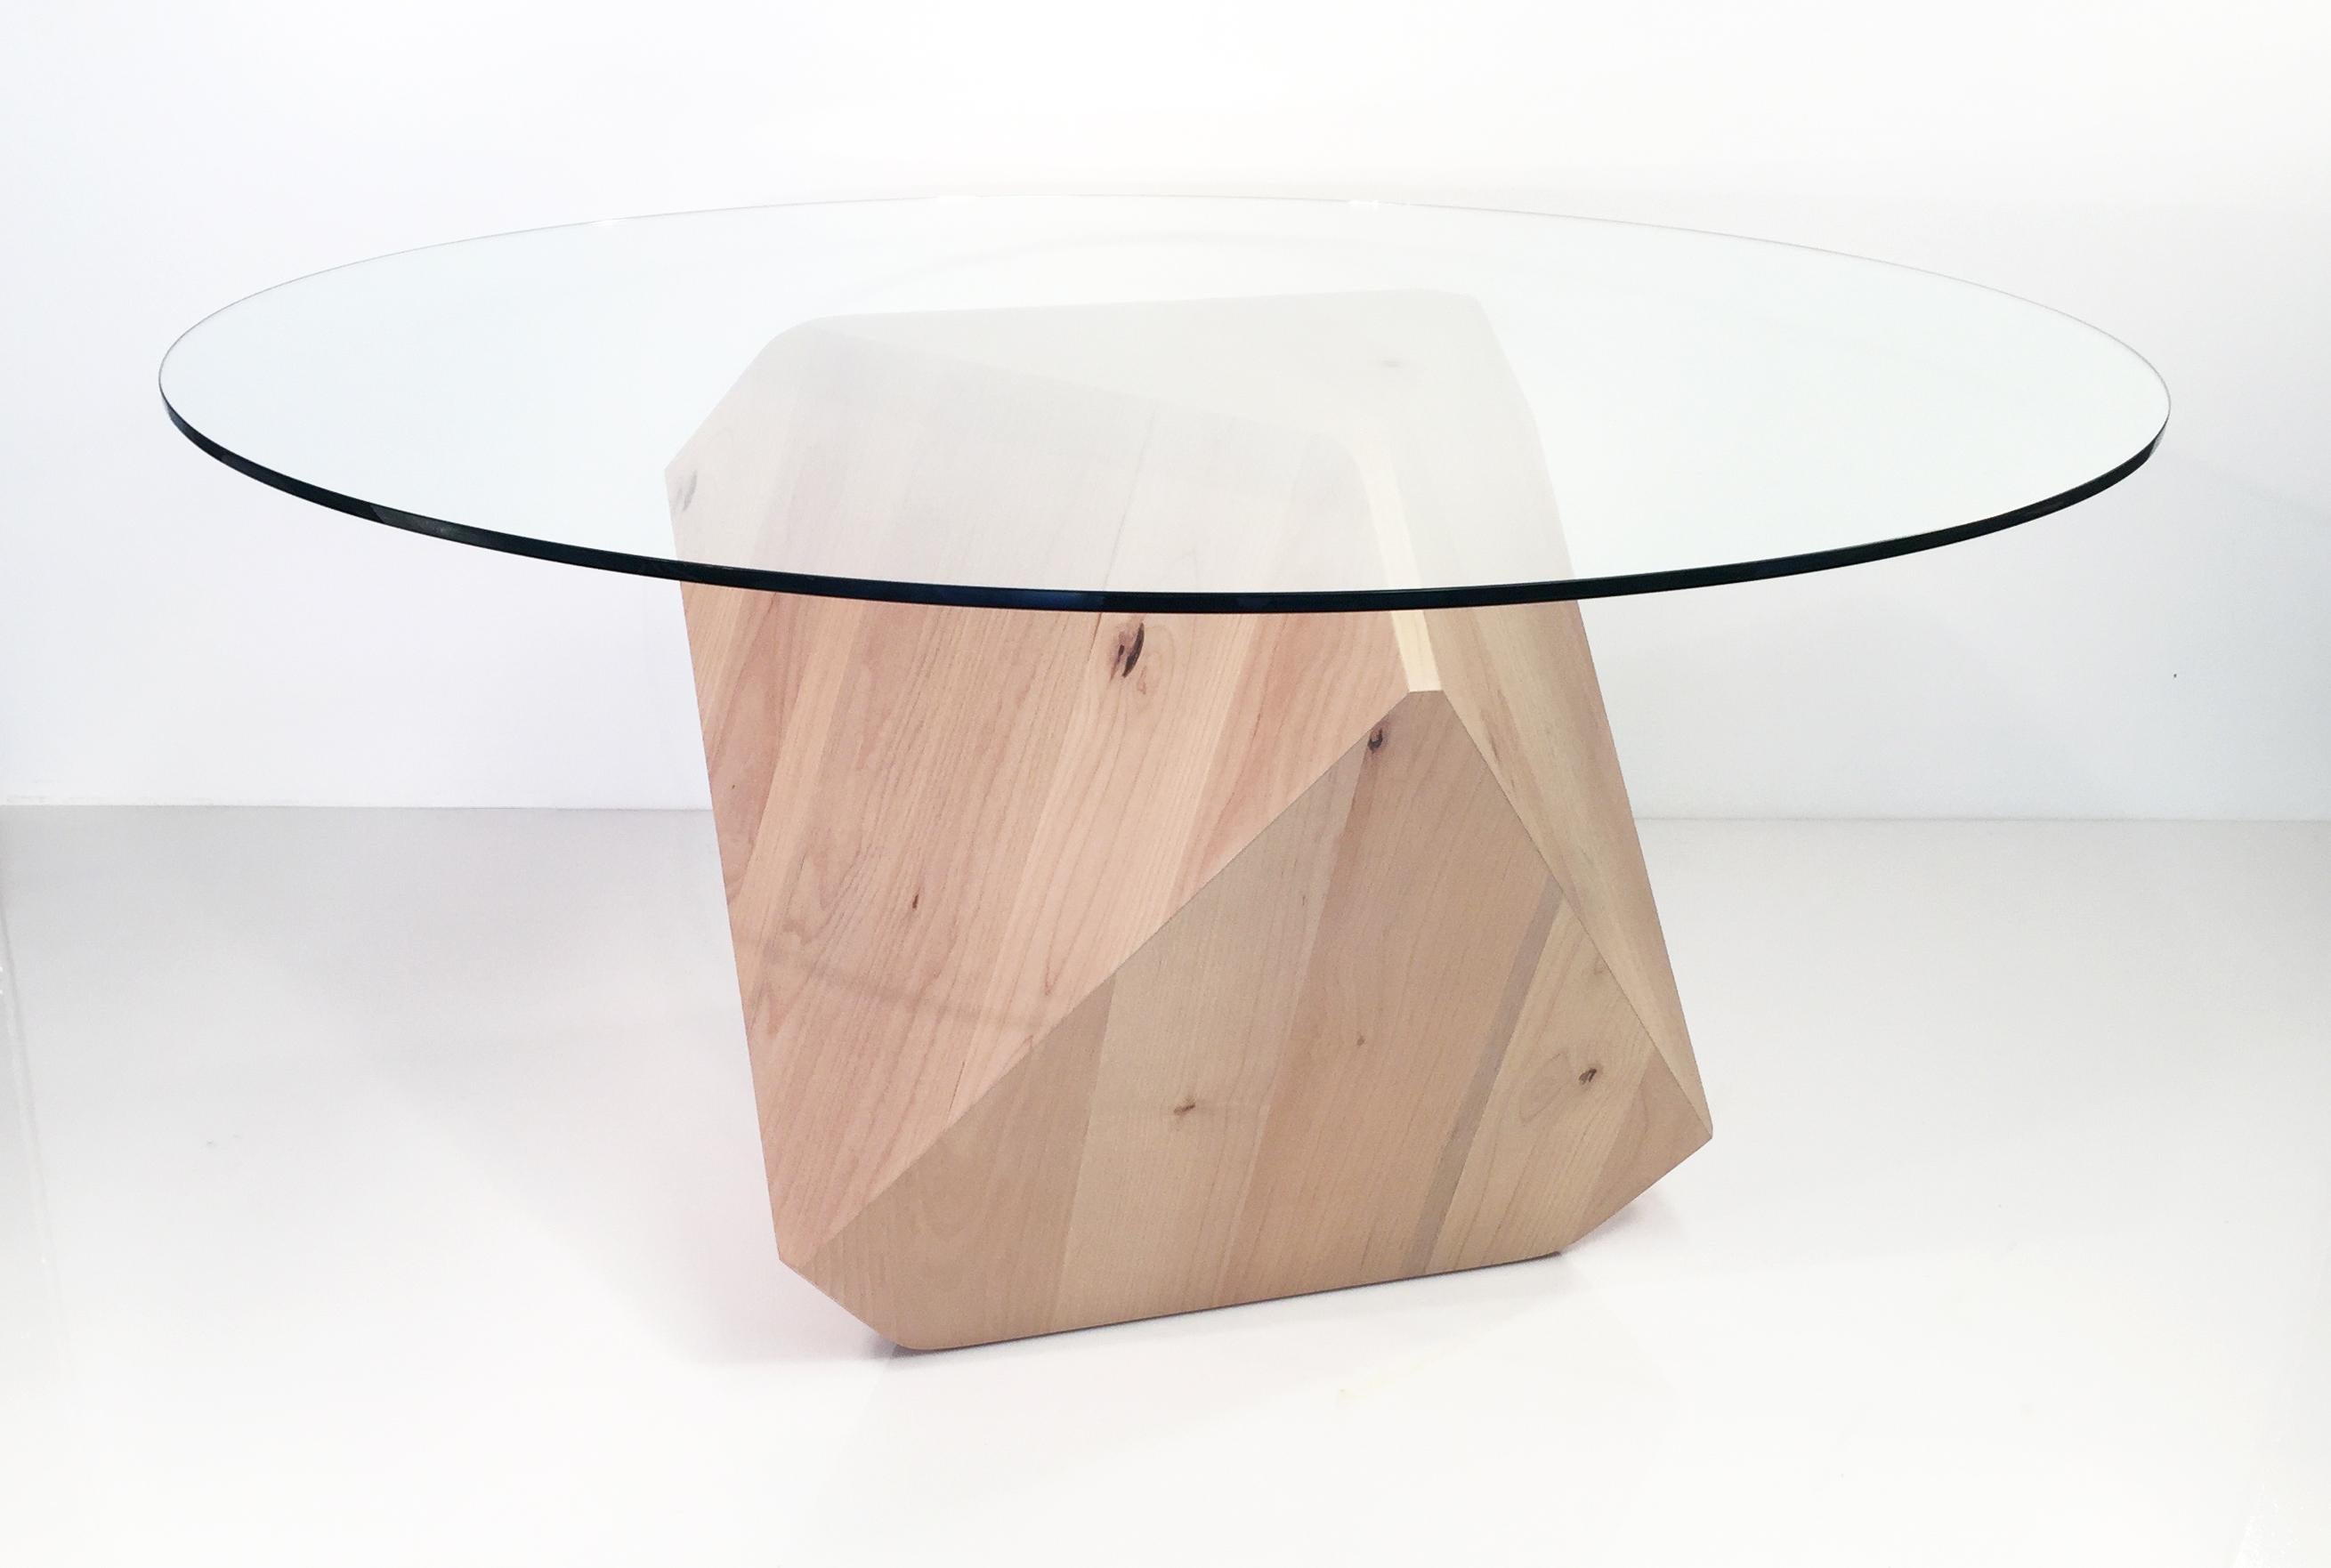 WAS $3800., now $1900. VERY LIMITED TIME.
Designed in 2000, the faceted table that ignited the cubist craze and put William Earle on the map.
Shown with a 54